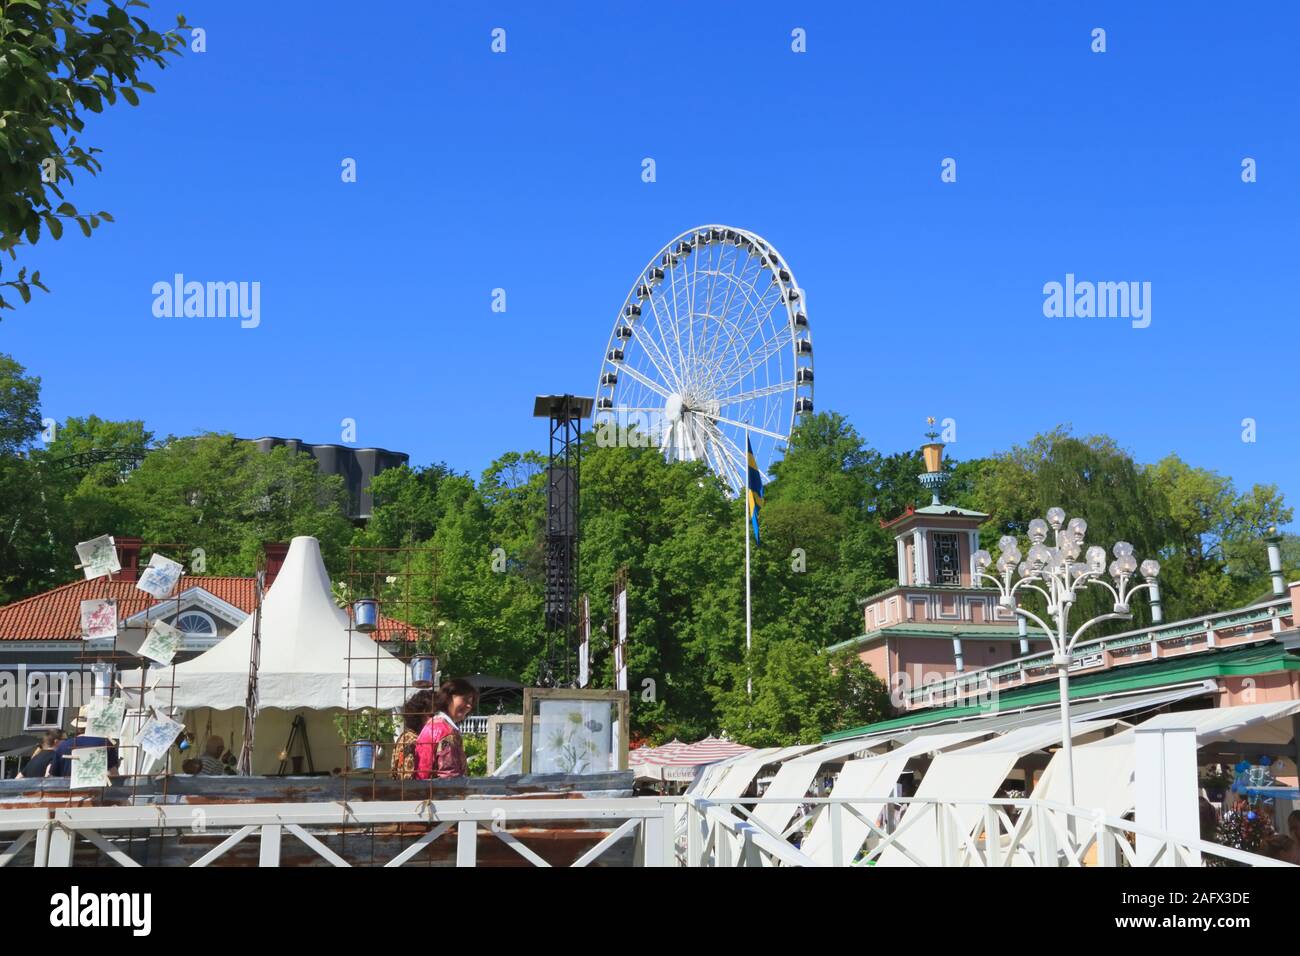 Part of the big wheel visible above the trees in Liseberg amusement park in Gothenburg city, Sweden. Stock Photo